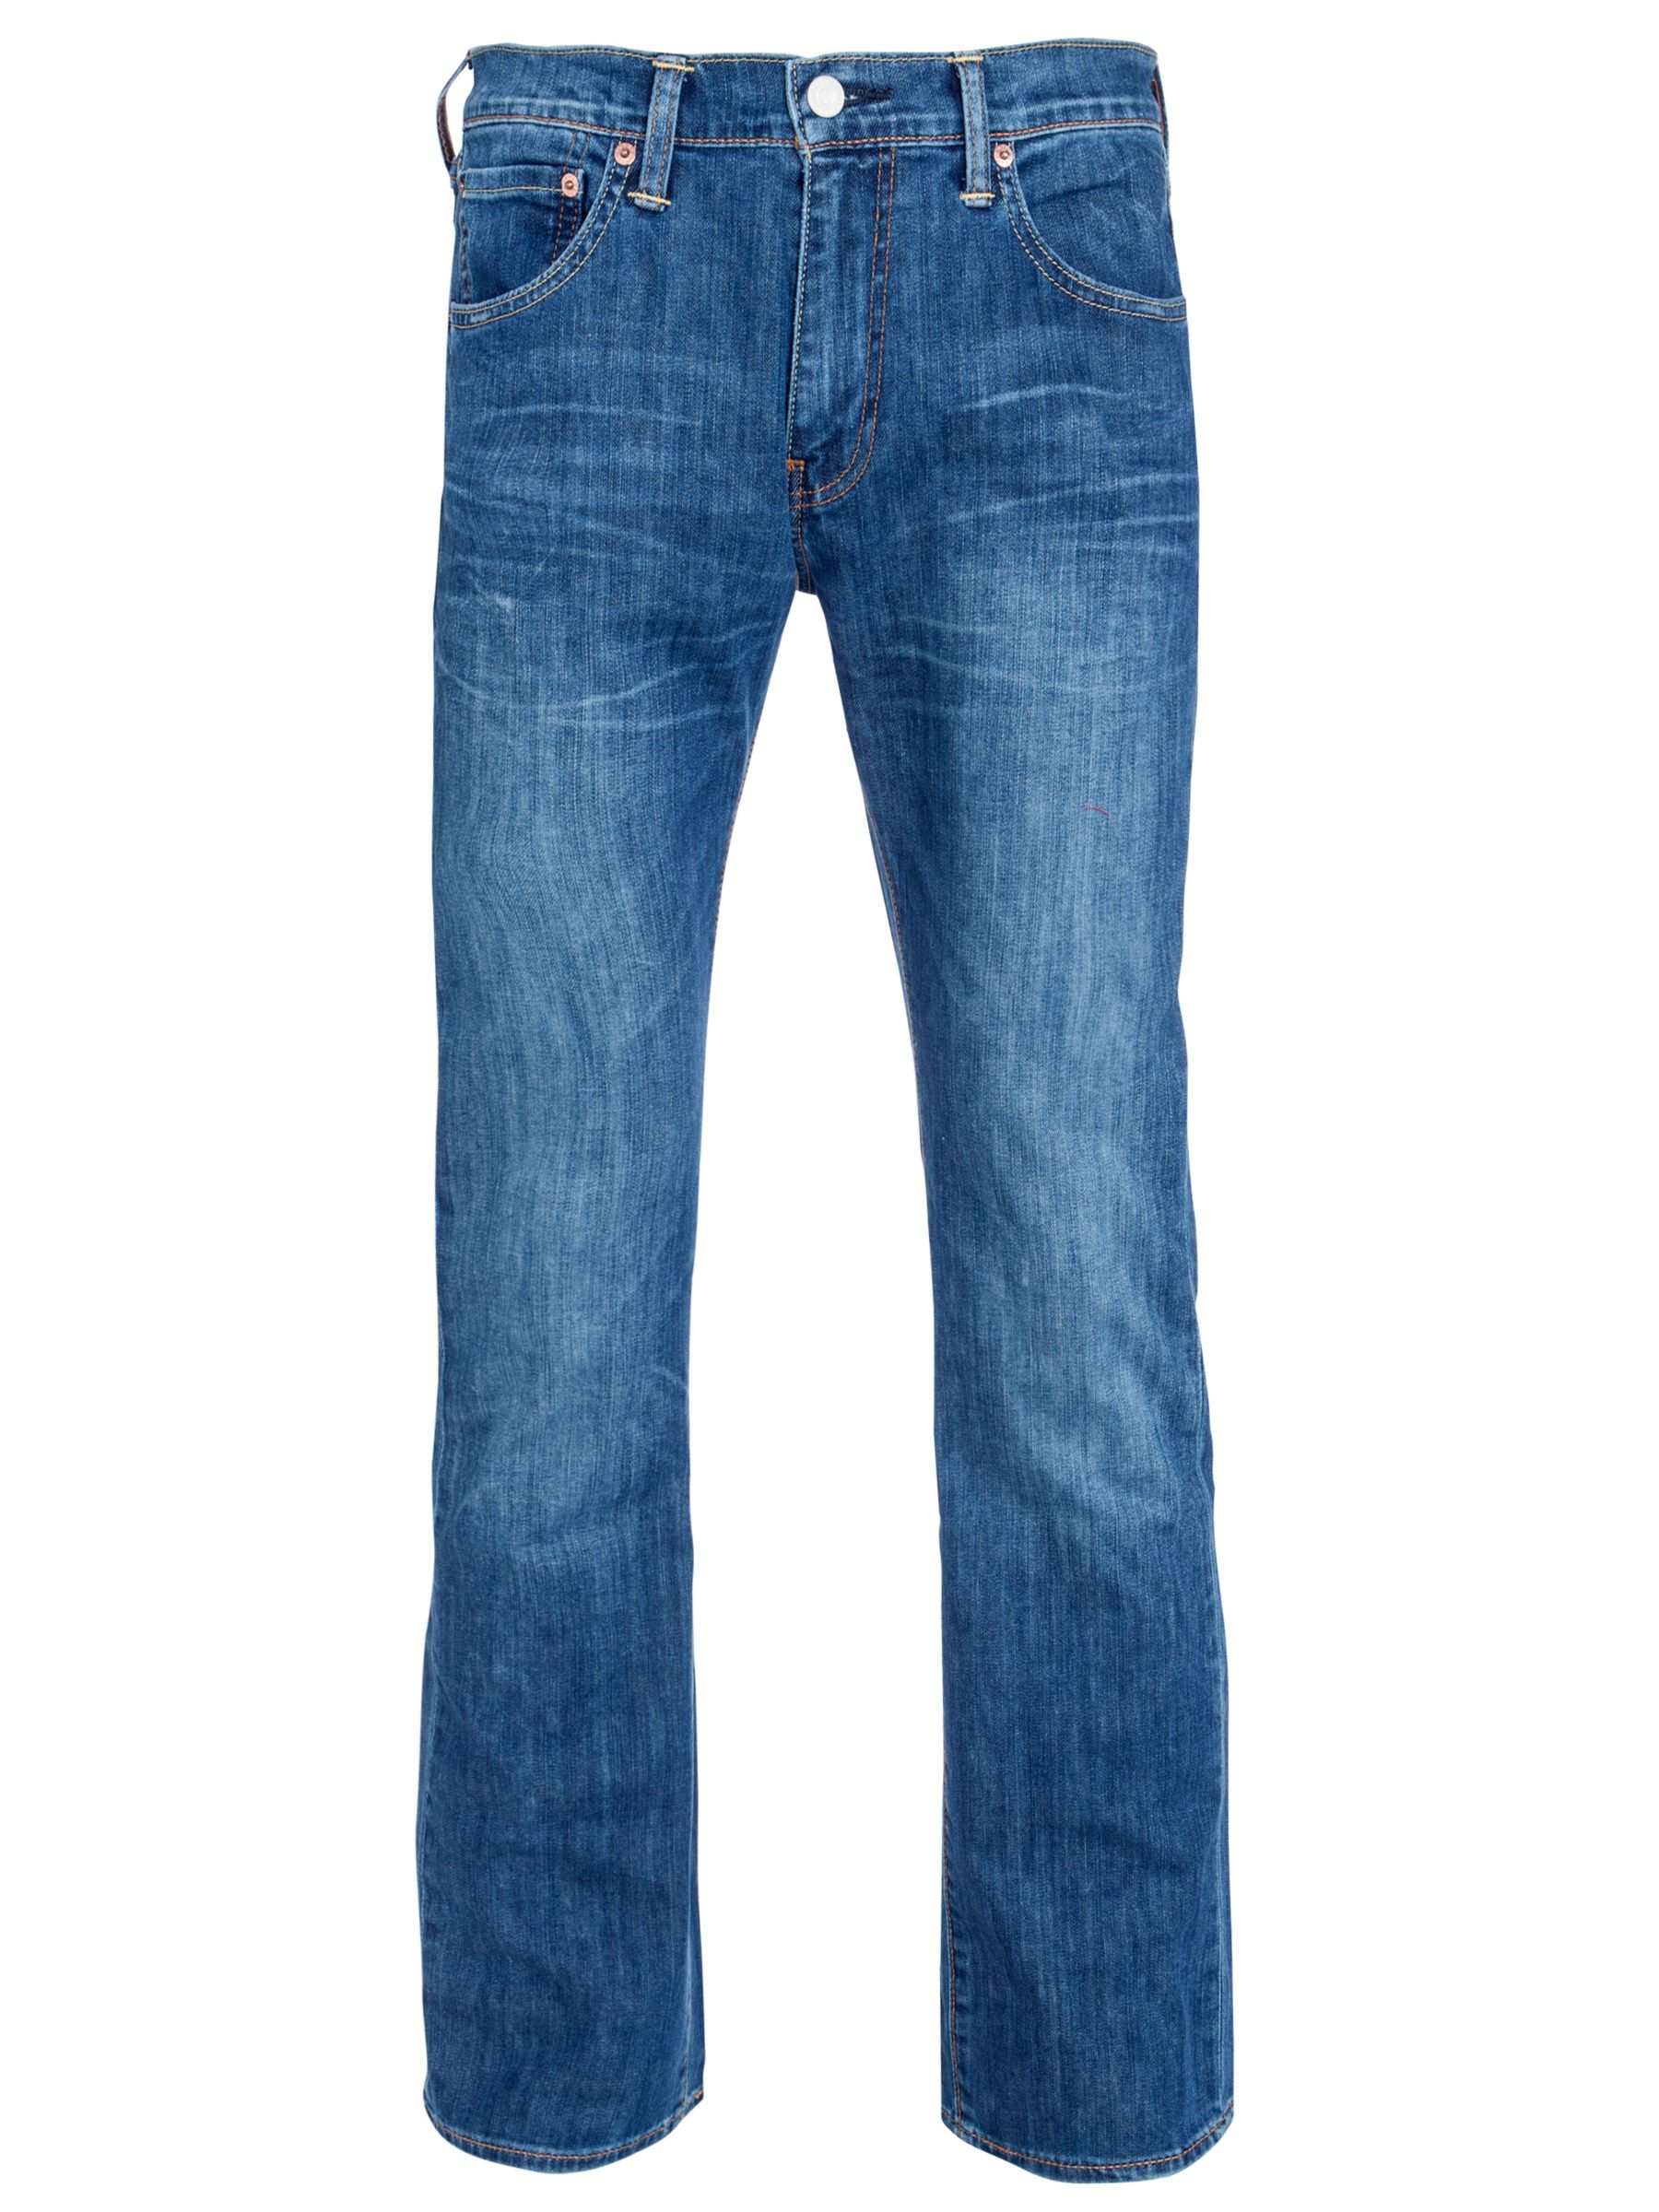 mens silver jeans canada